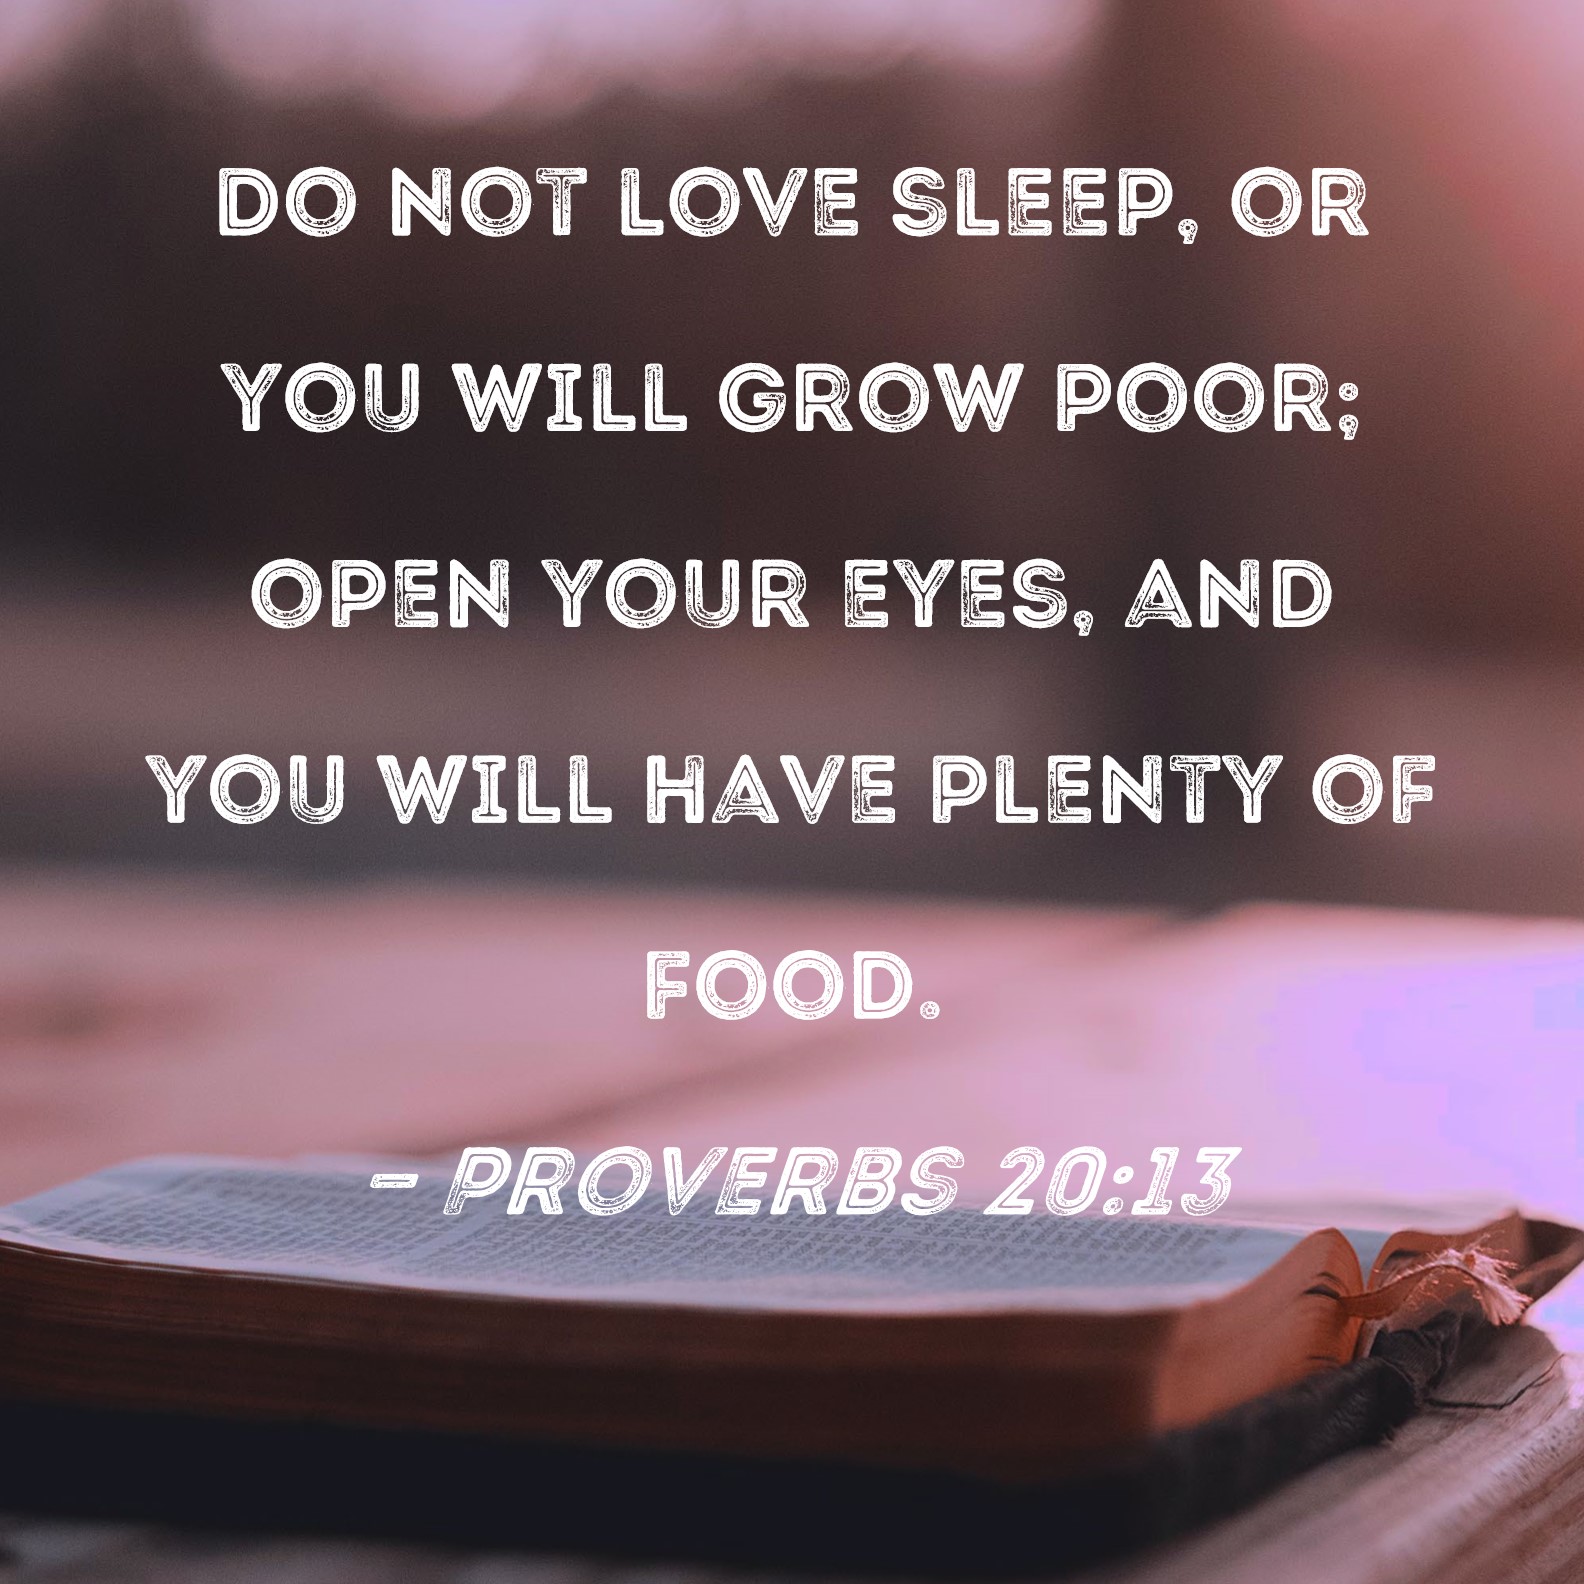 Proverbs 20:13 Do not love sleep, or you will grow poor; open your